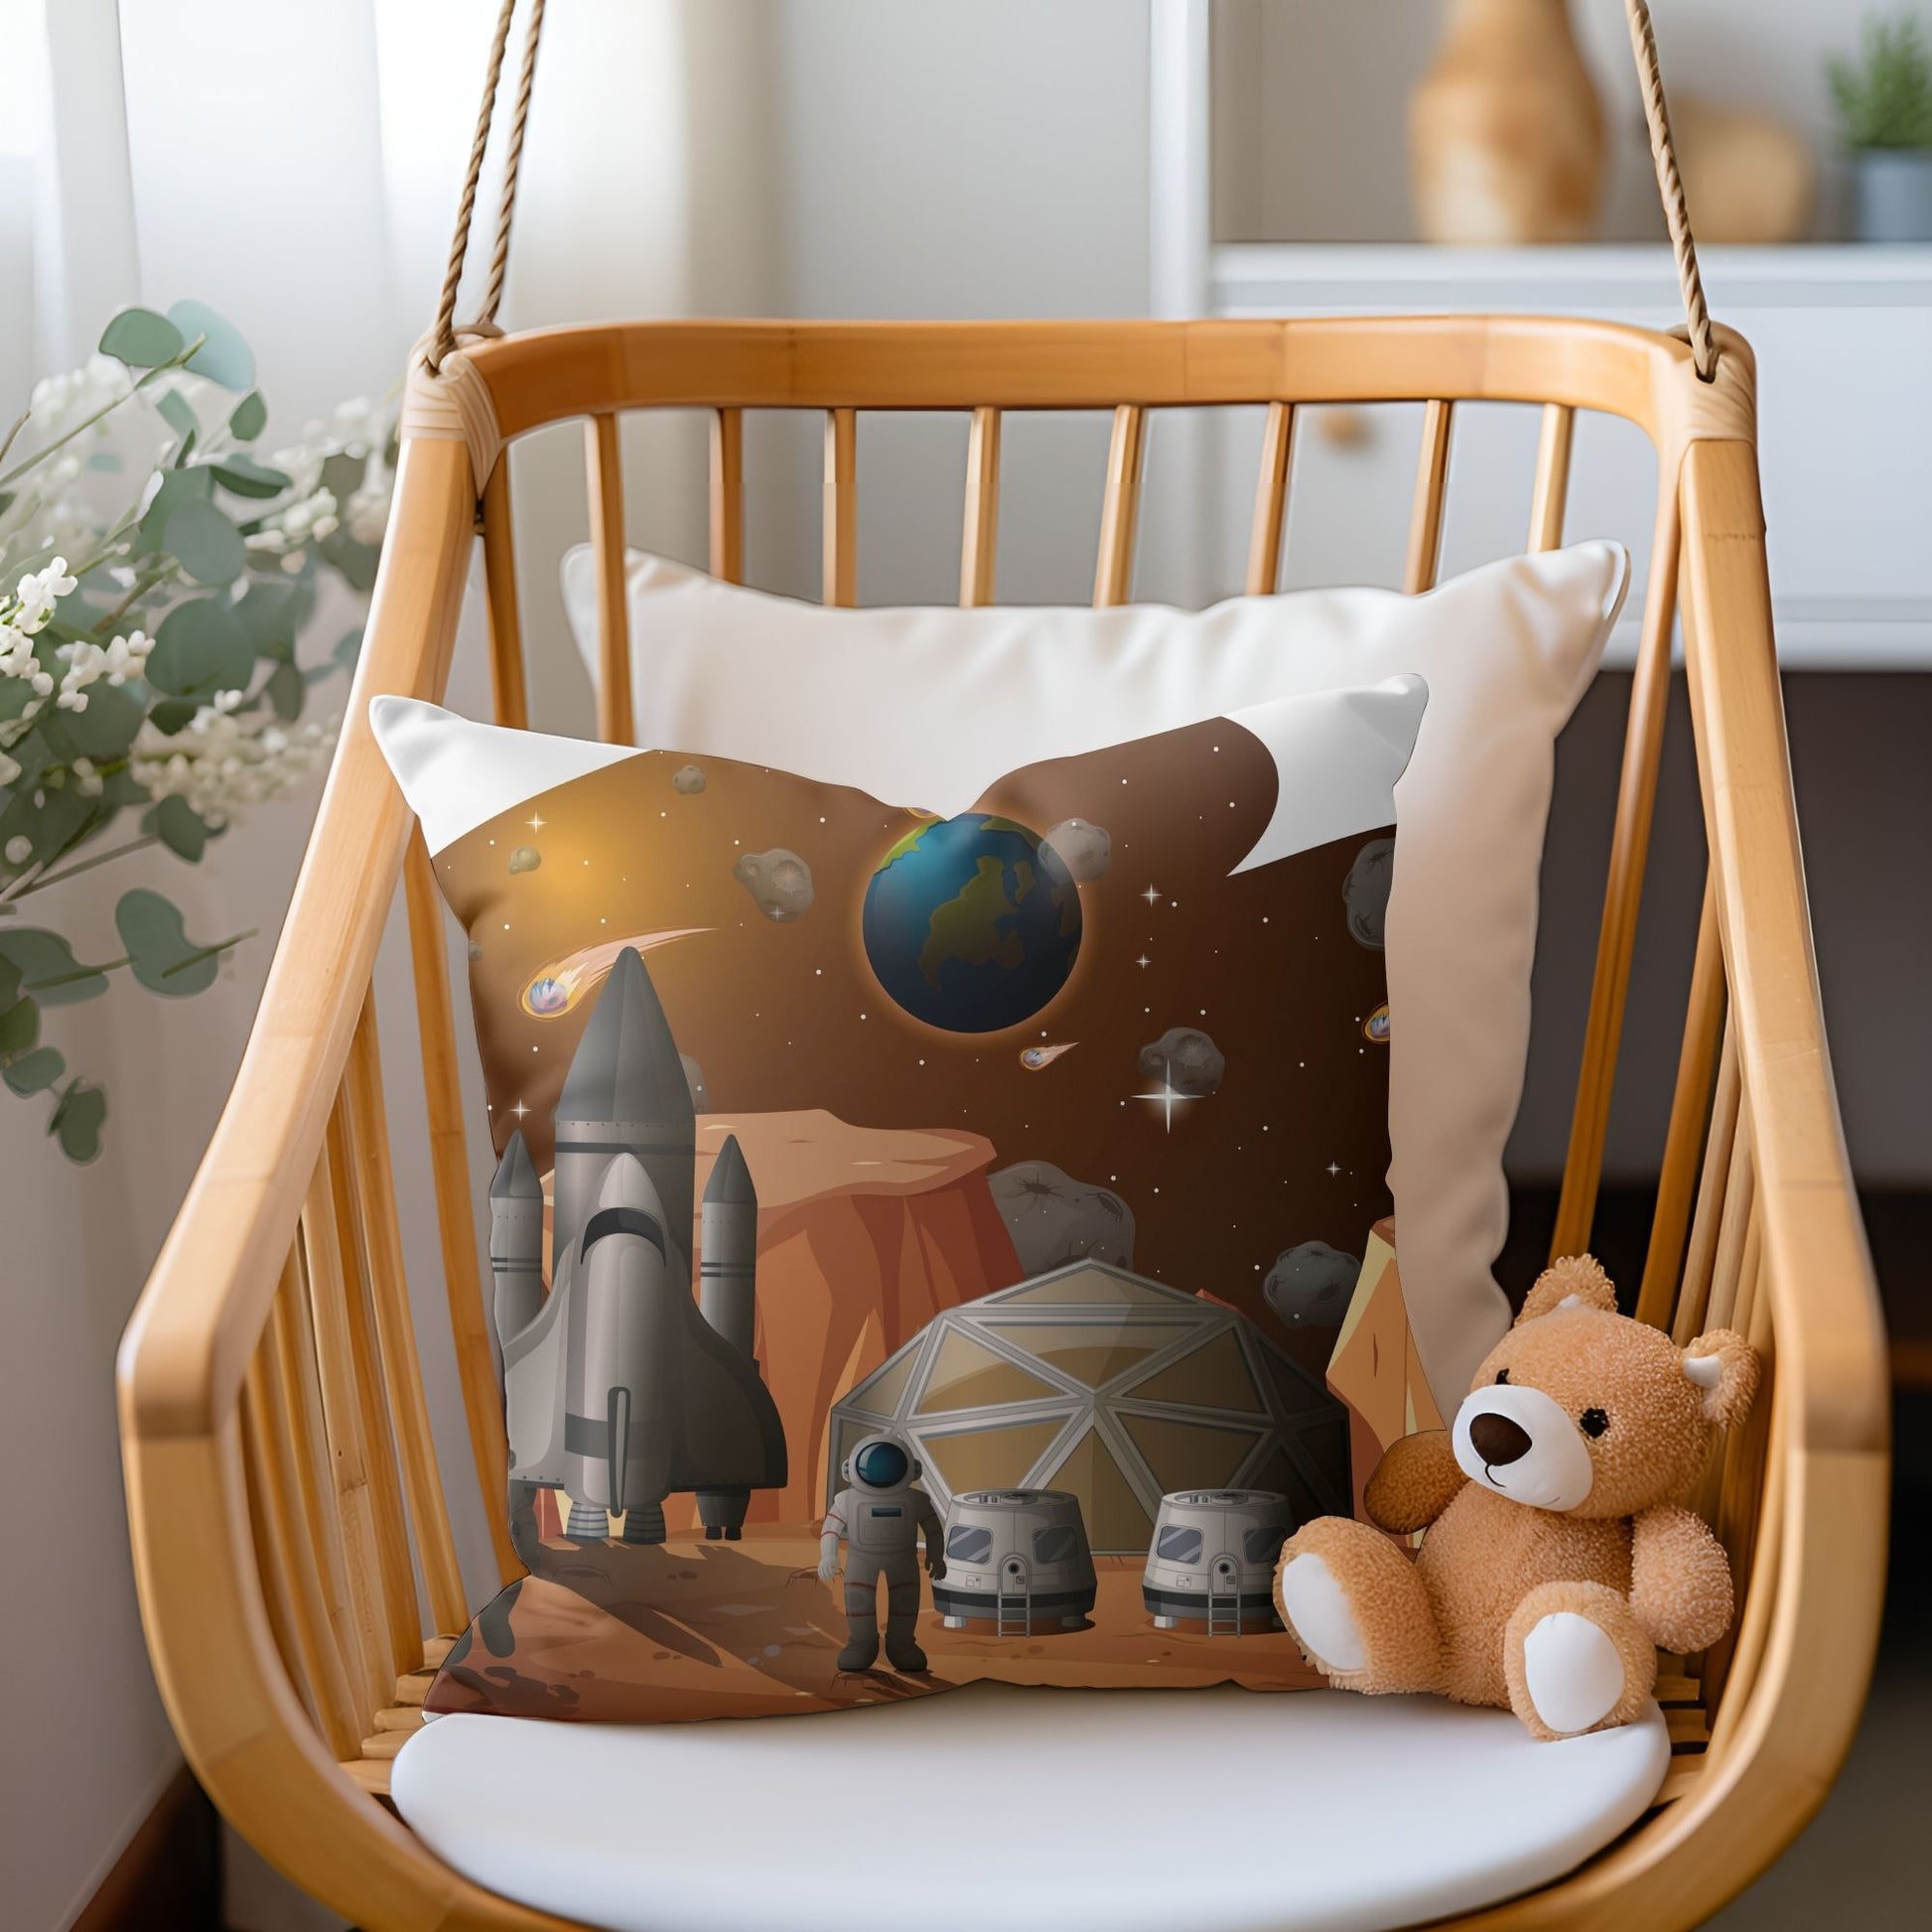 Whimsical kids pillow adorned with an astronaut spacecraft design for imaginative play.